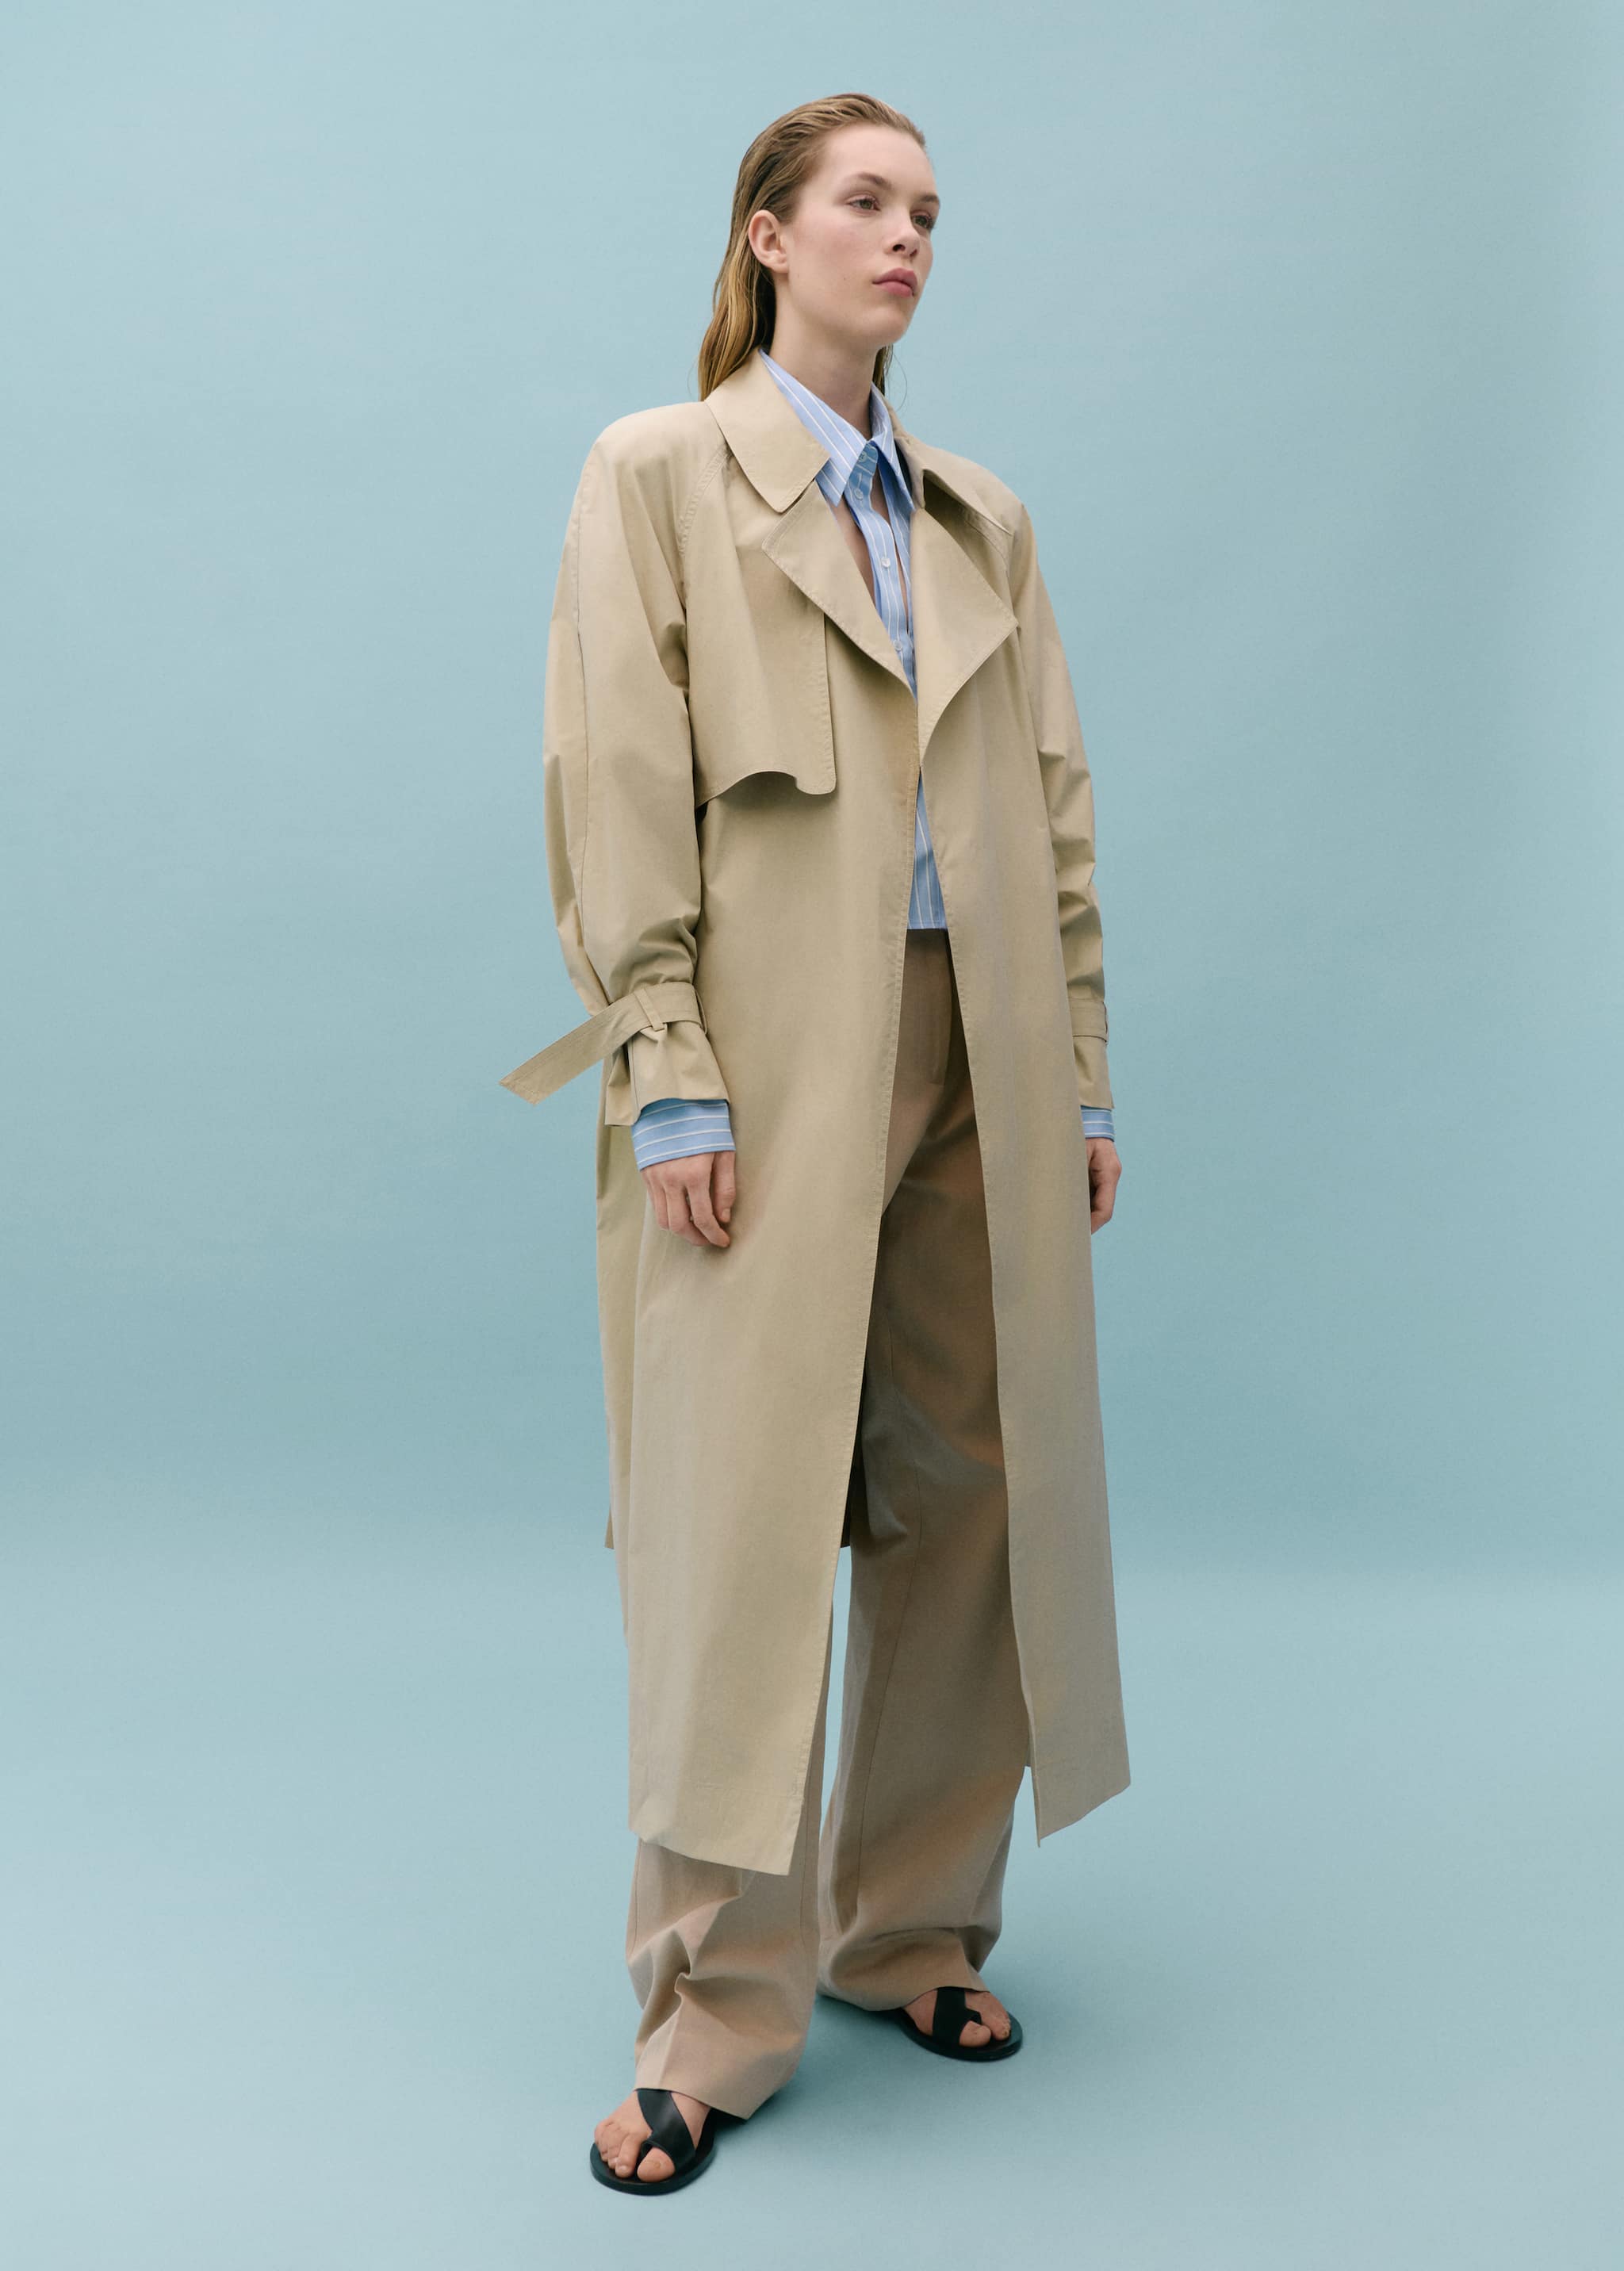 100% cotton long trench coat - General plane